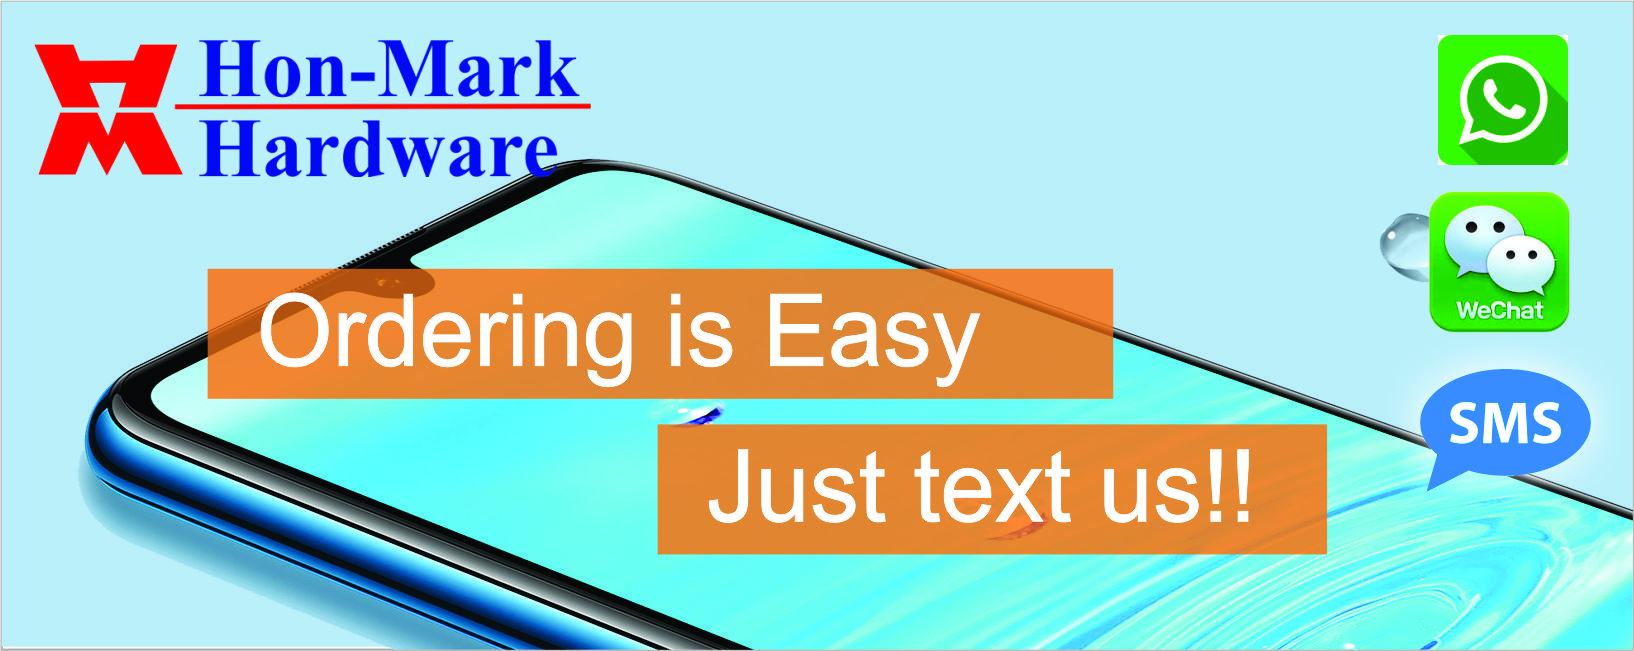 texting-banner